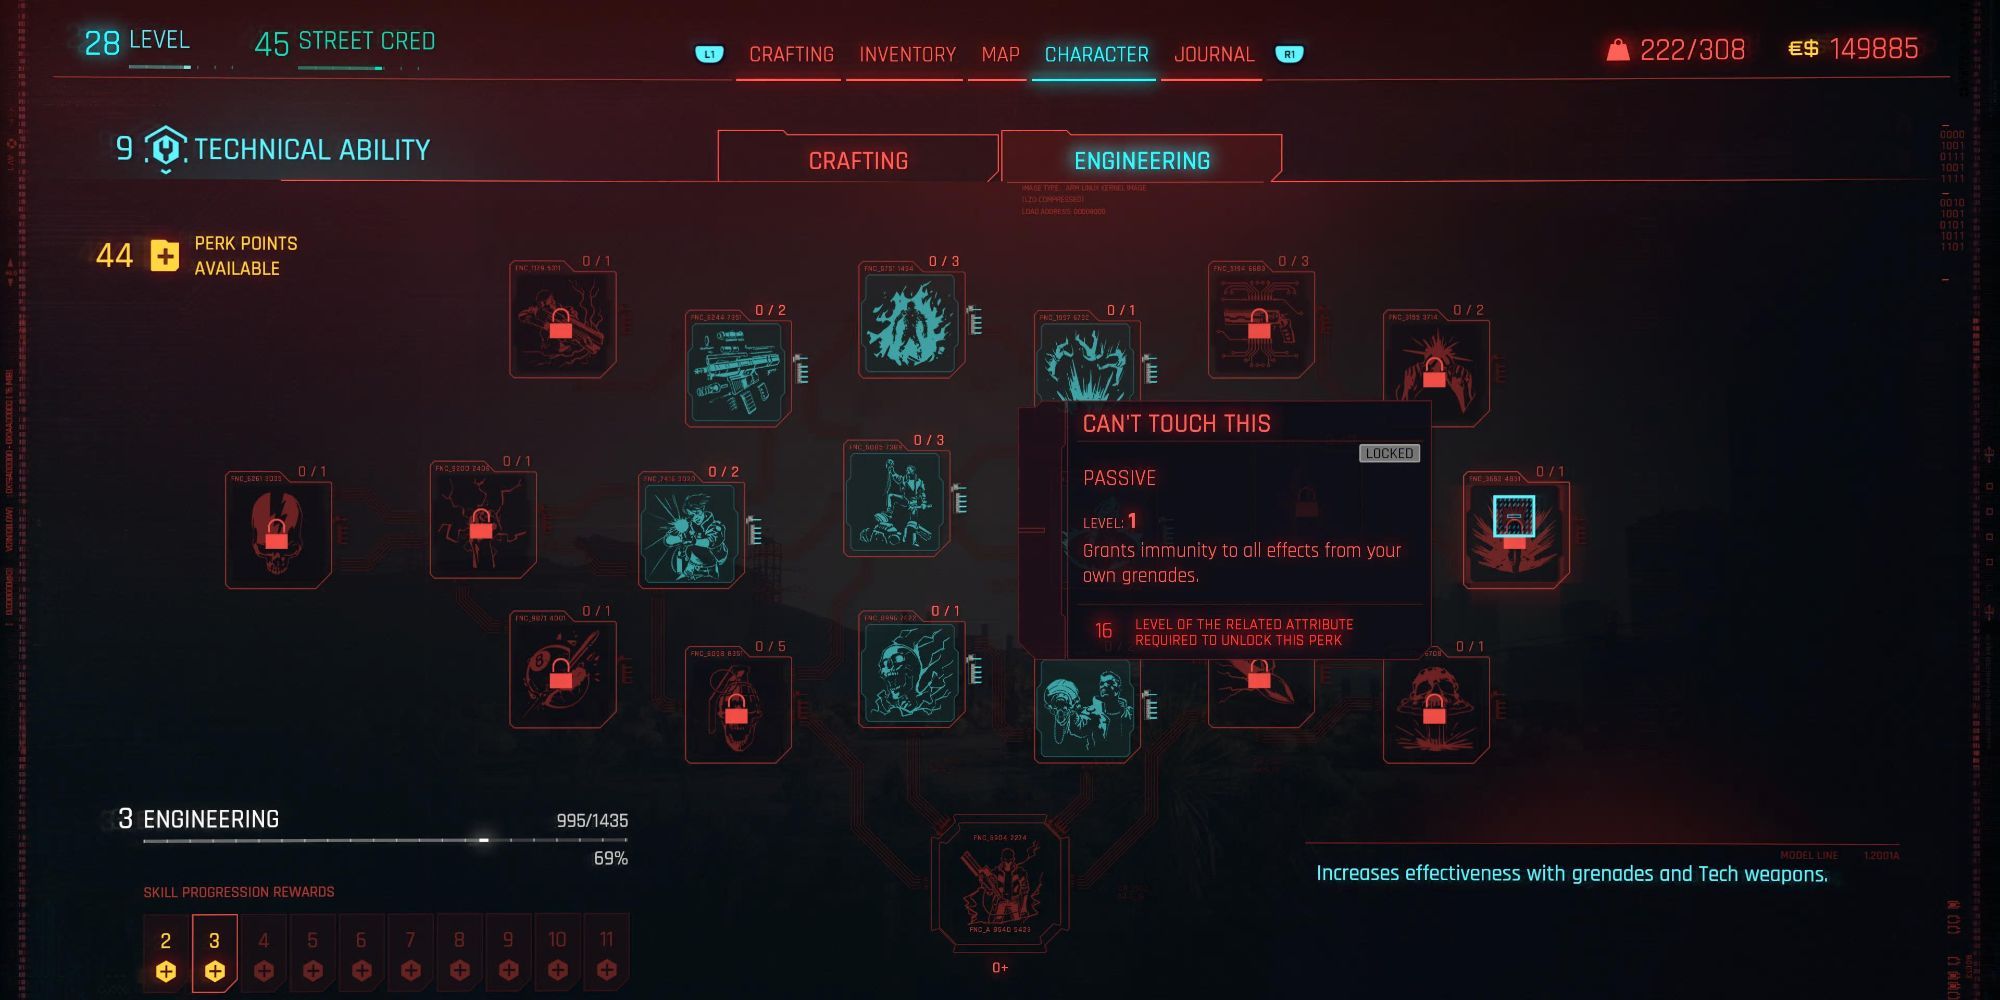 Cyberpunk 2077 Engineering Can't Touch This Skill Tree